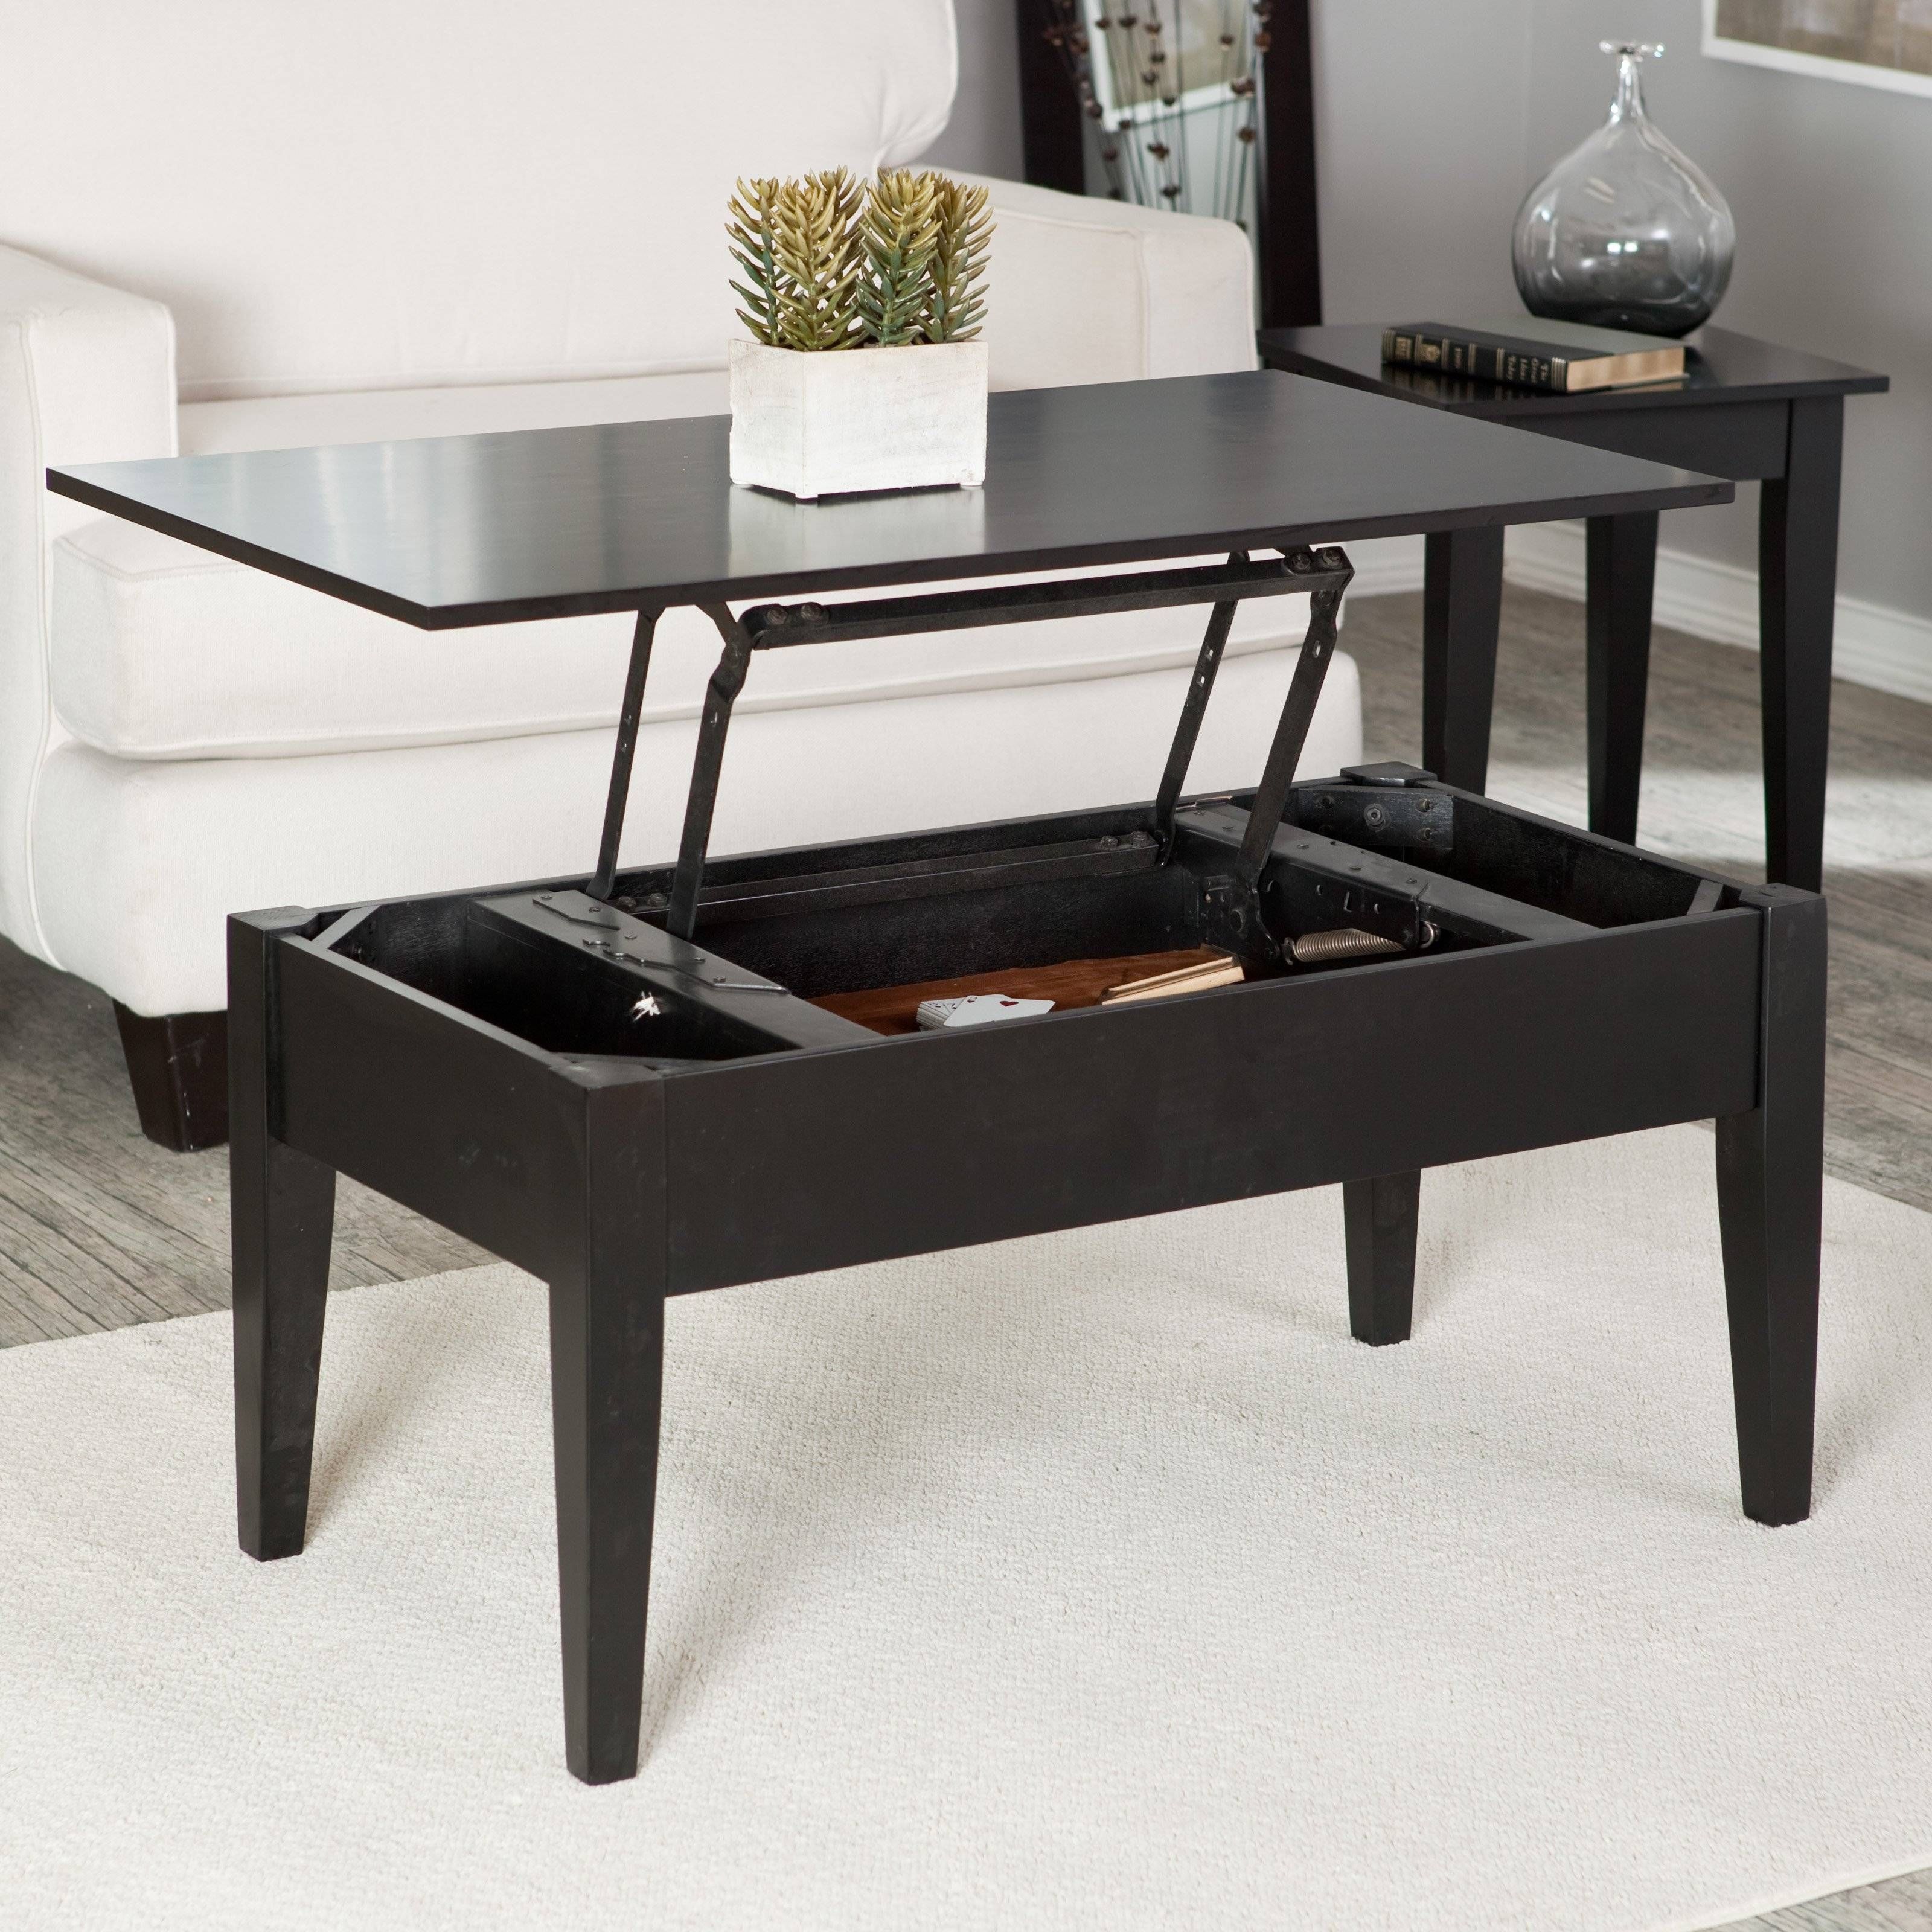 Turner Lift Top Coffee Table – Espresso | Hayneedle With Top Lift Coffee Tables (View 5 of 30)